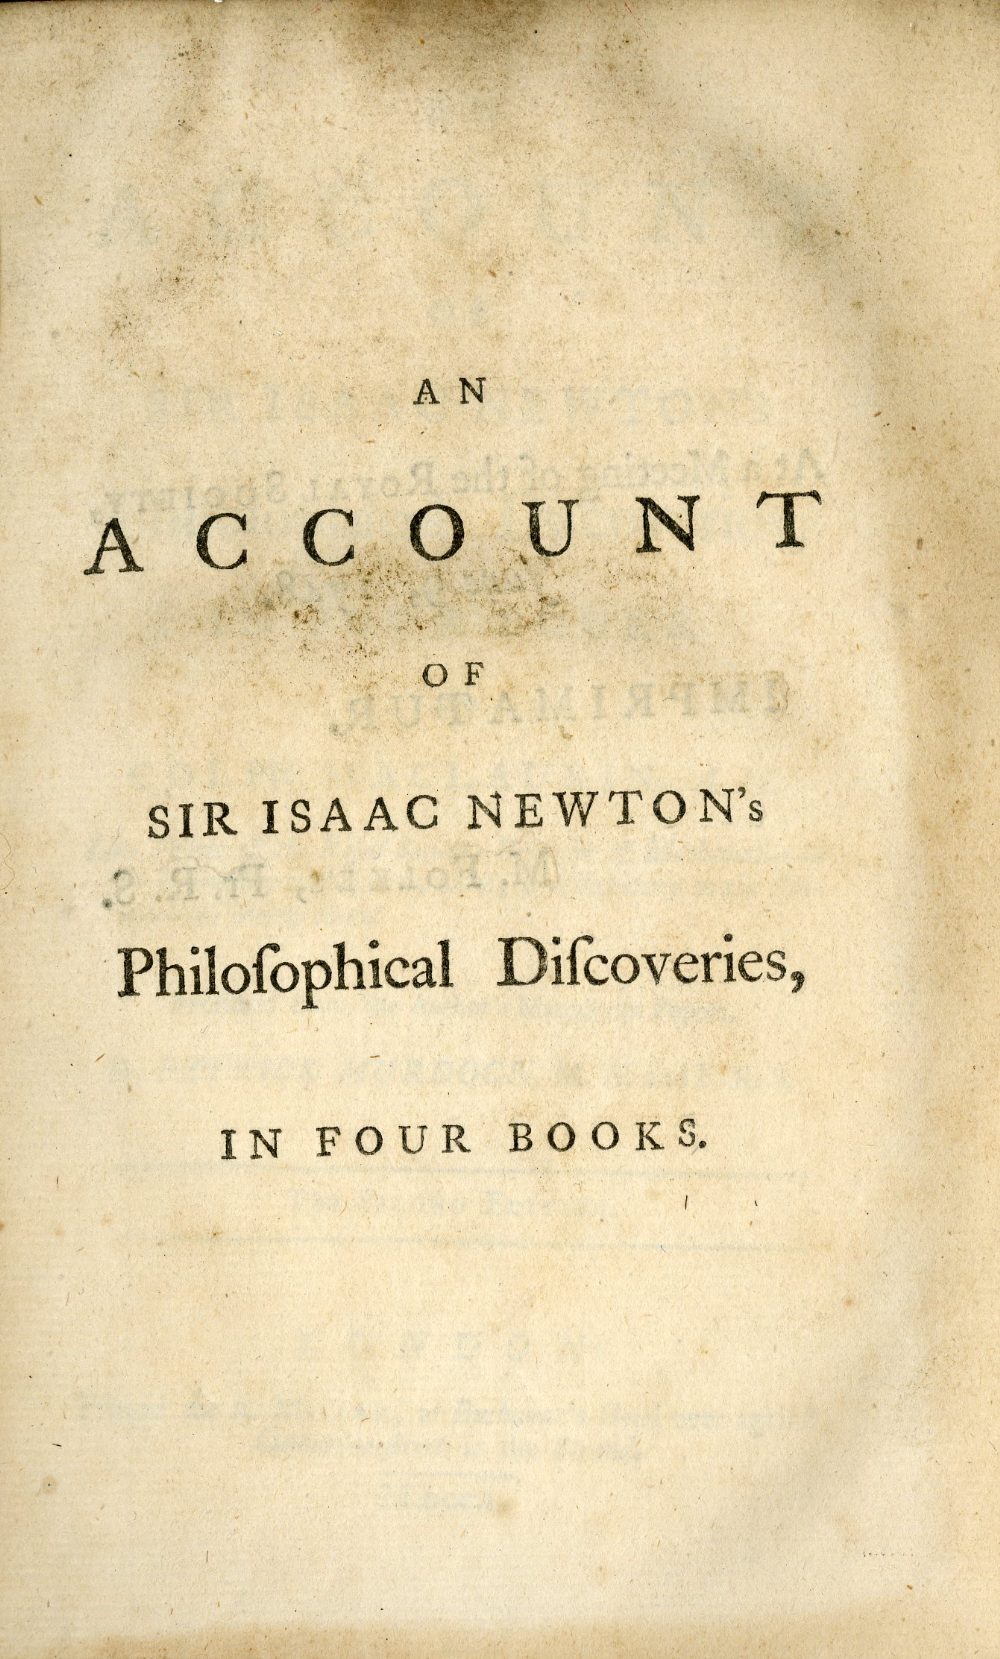 Murdoch (Patrick) An Account of Sir Isaac Newton's Philosophical Discoveries in Four Books by Colin